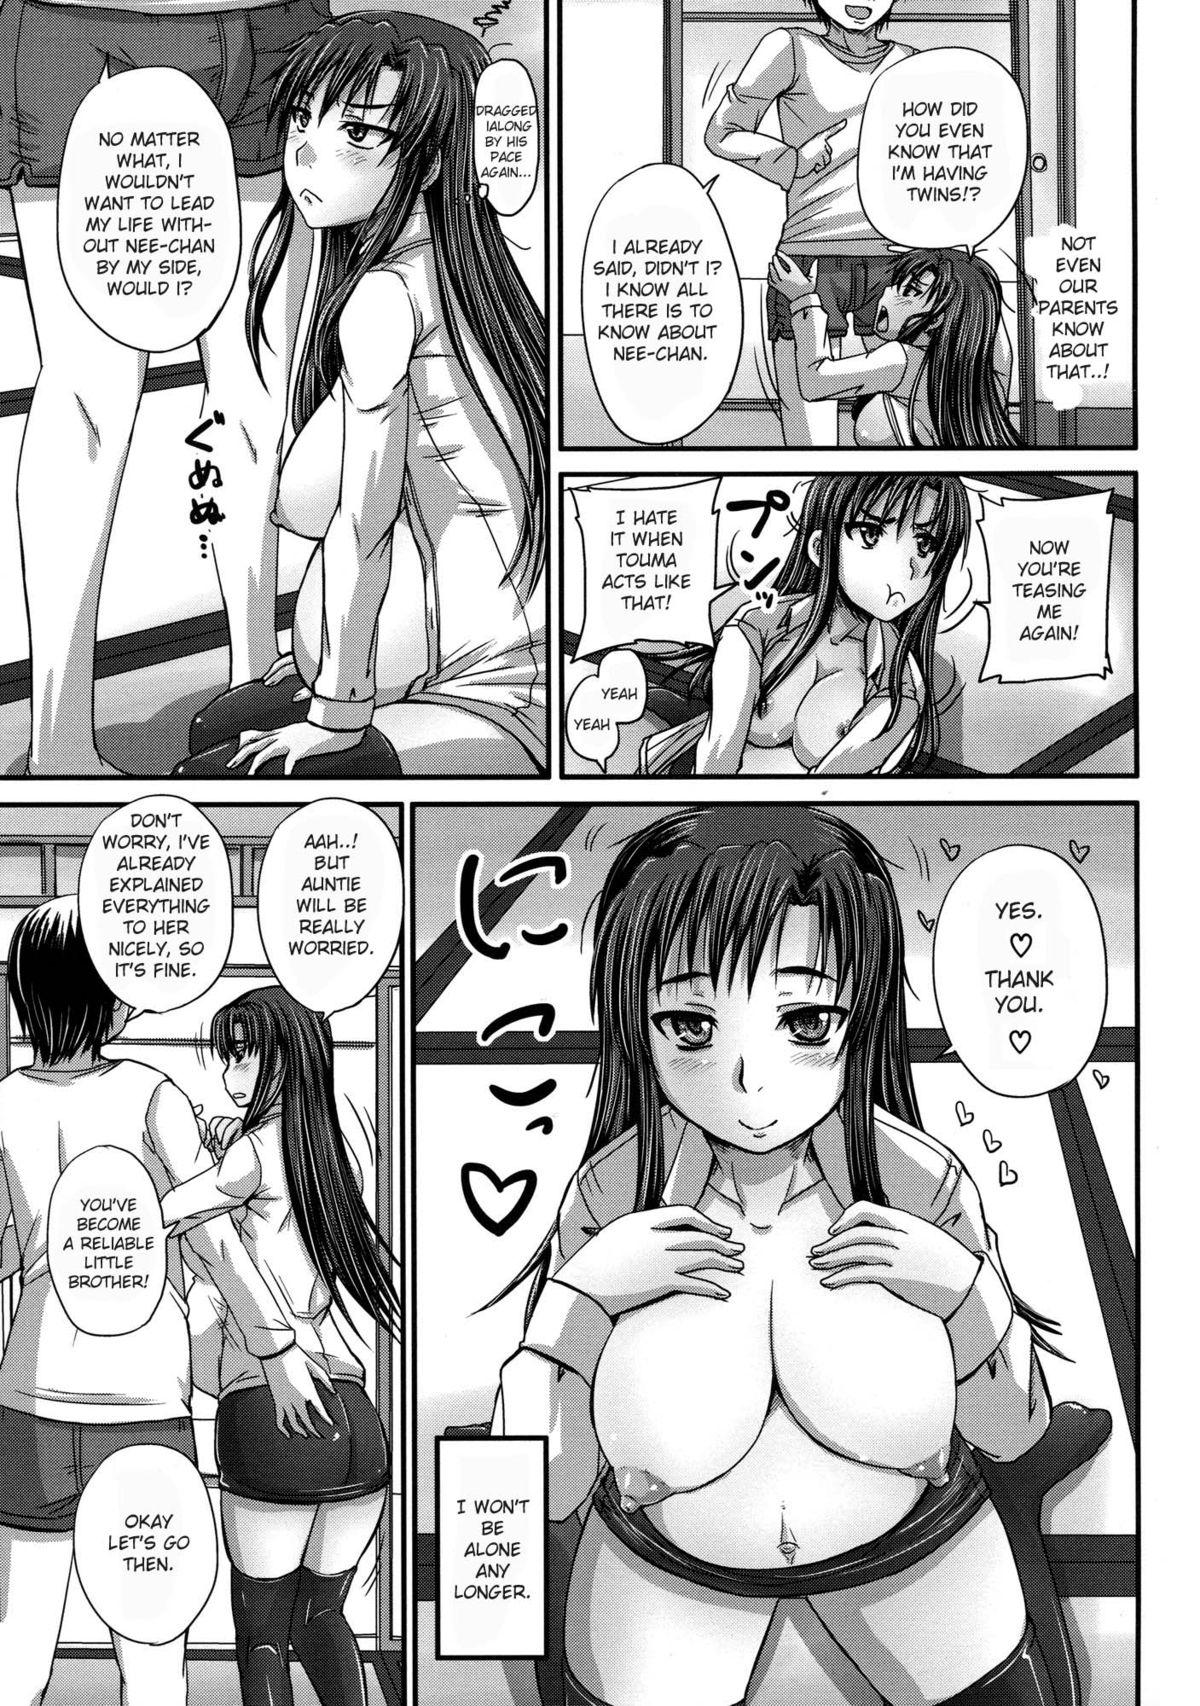 [Akigami Satoru] Tsukurou! Onaho Ane - Let's made a Sex Sleeve from Sister Ch. 1-2 [English] [snowshoes] 84